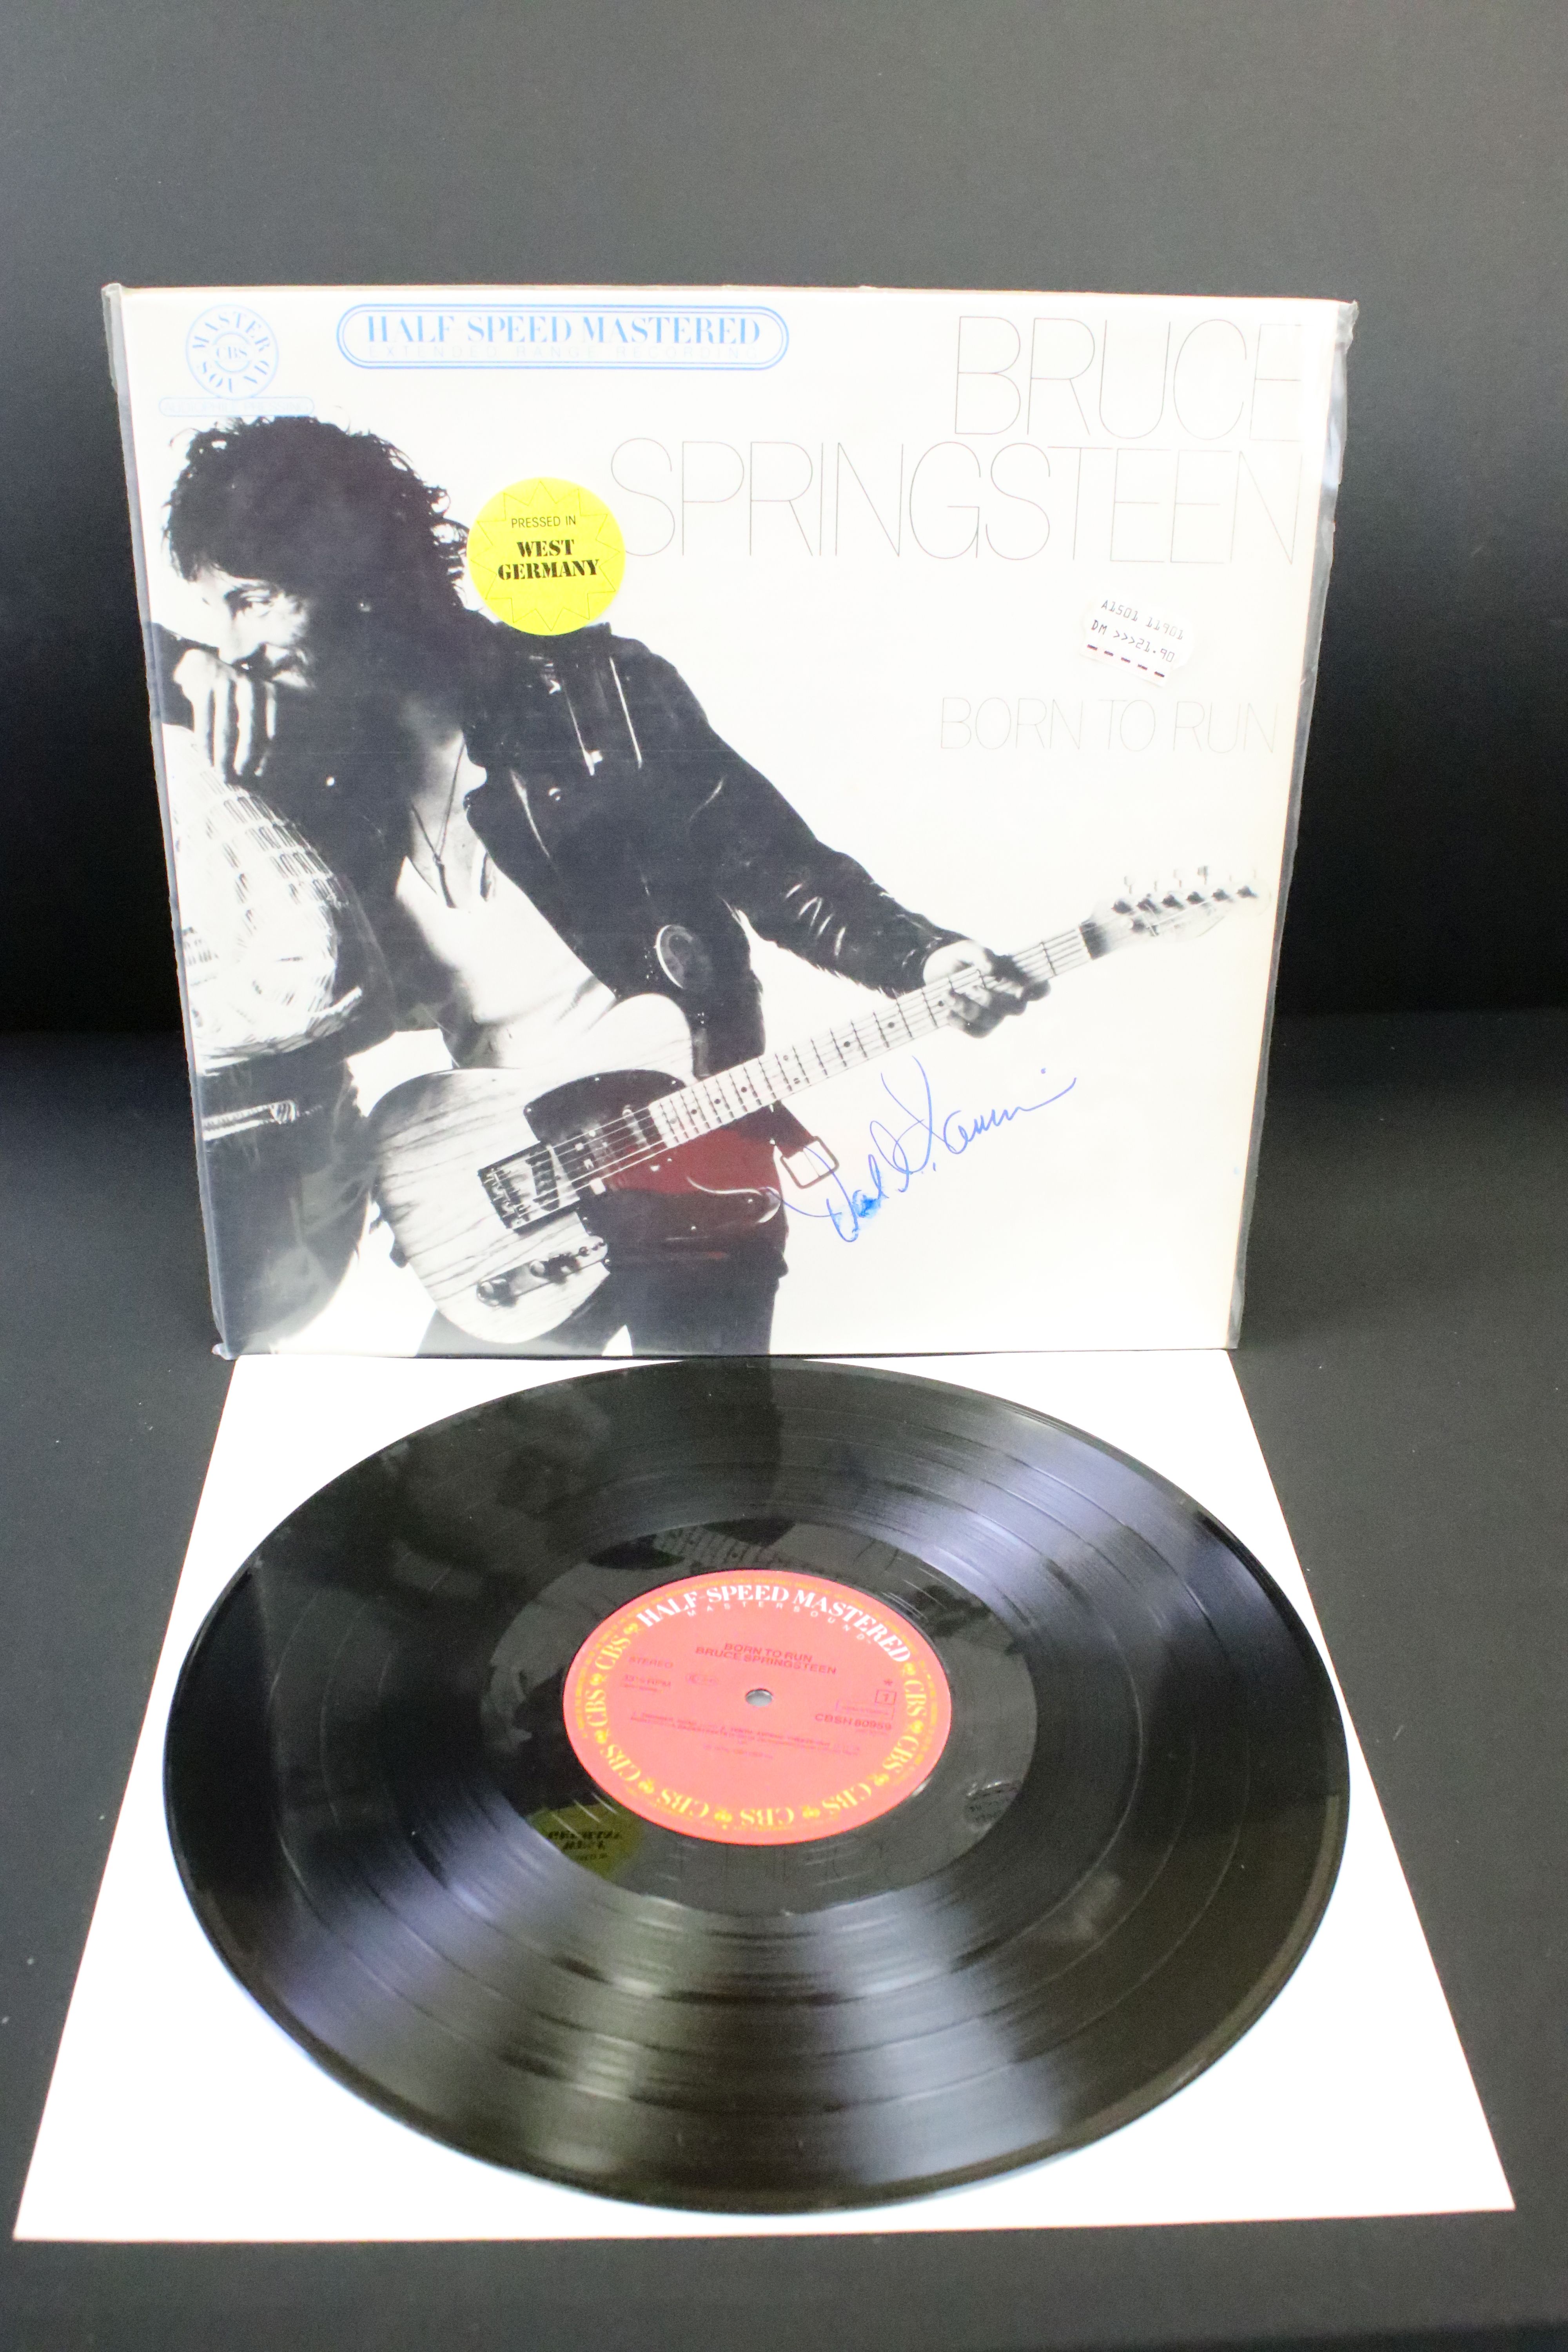 Vinyl / Autograph - 2 Bruce Springsteen Half Speed Mastered albums to include: Born To Run (CBS - Image 2 of 9